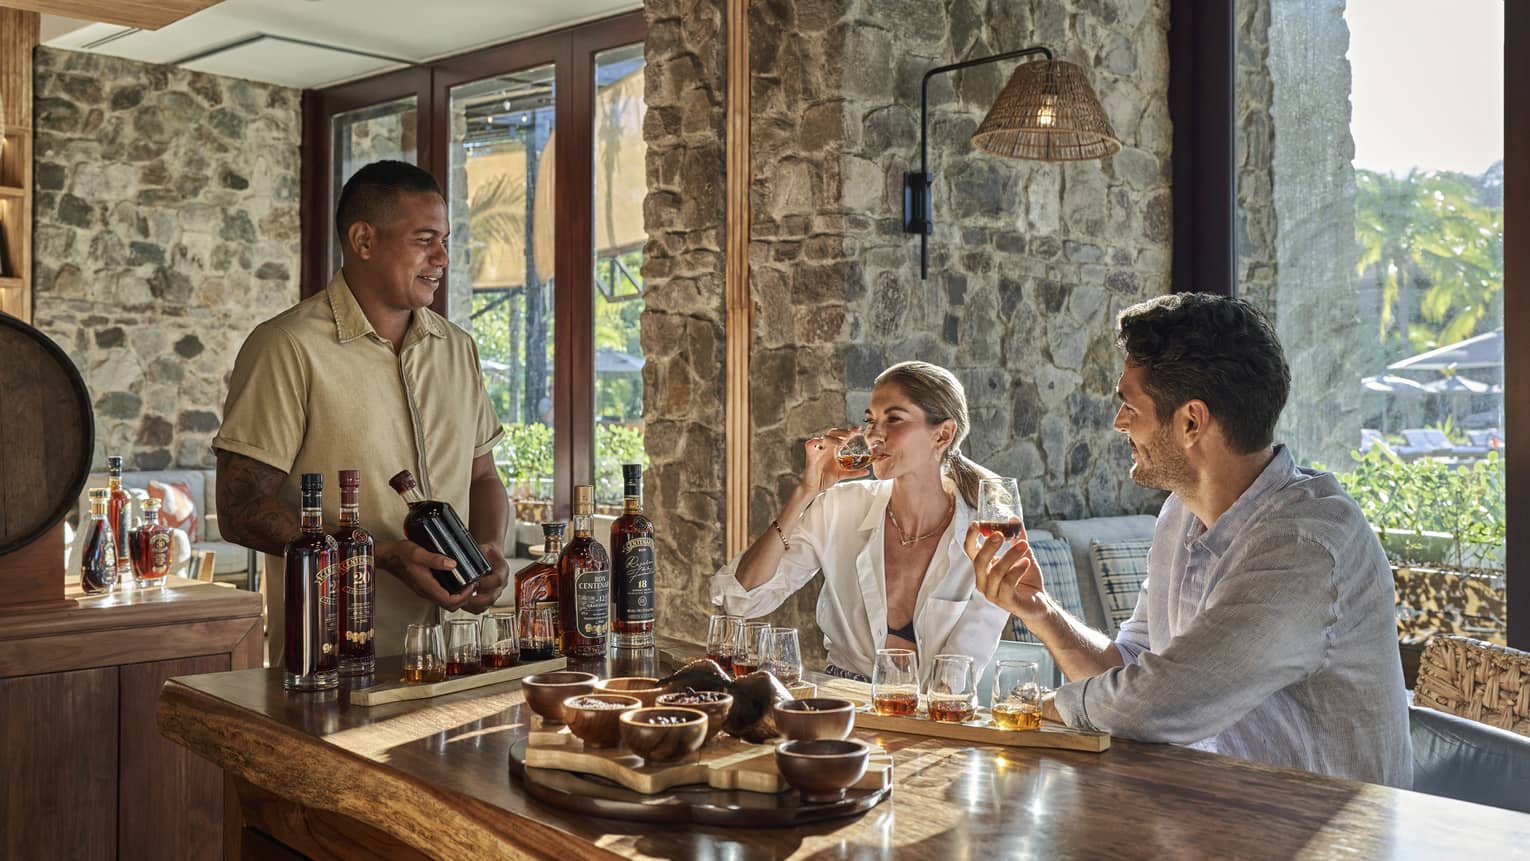 In a rustic bar with windows set between stone walls, a bartender looks on as two guests sample from a flight of eight rums.